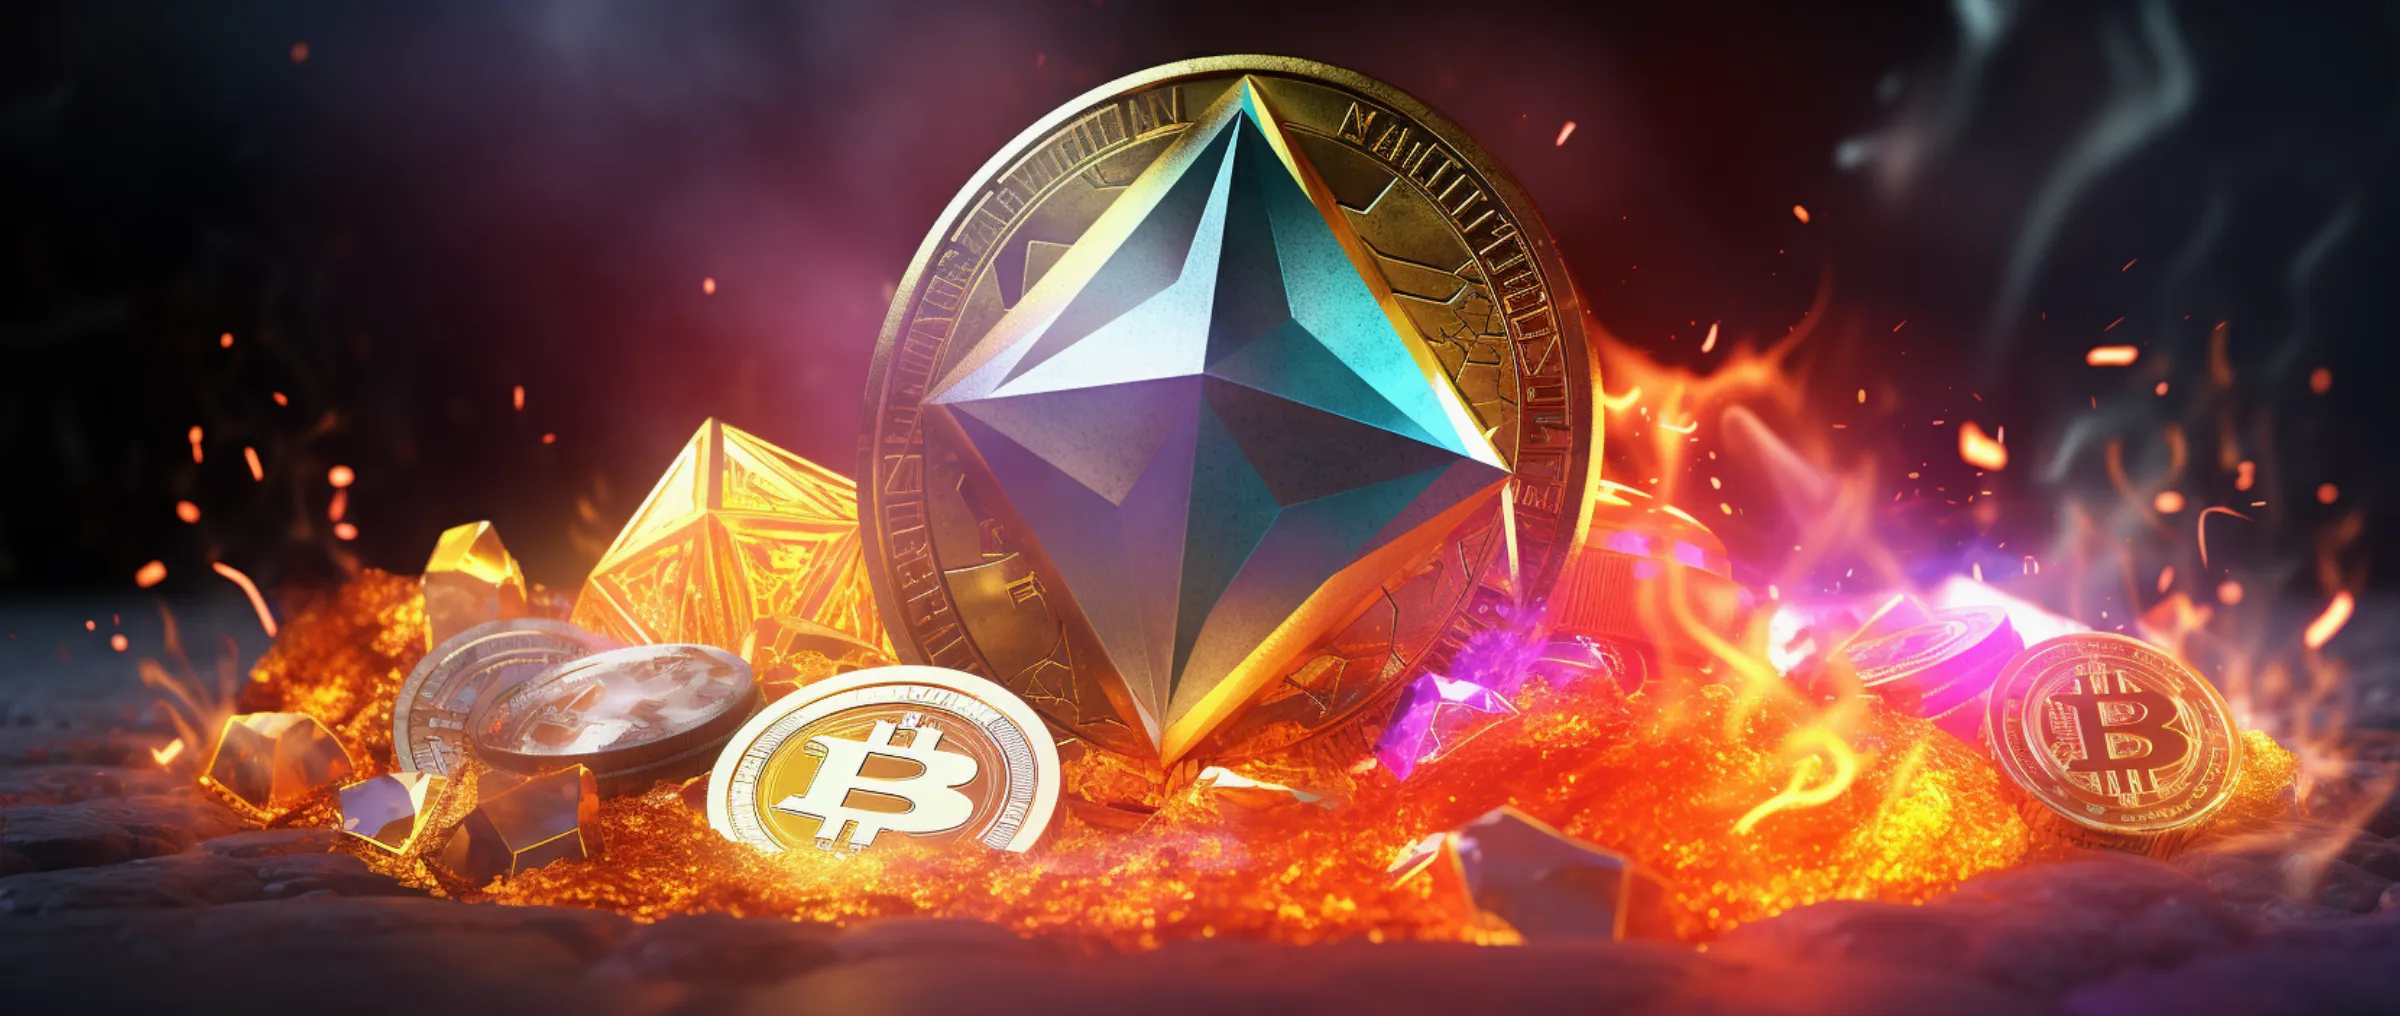 Hot altcoins: must-watch cryptocurrencies today